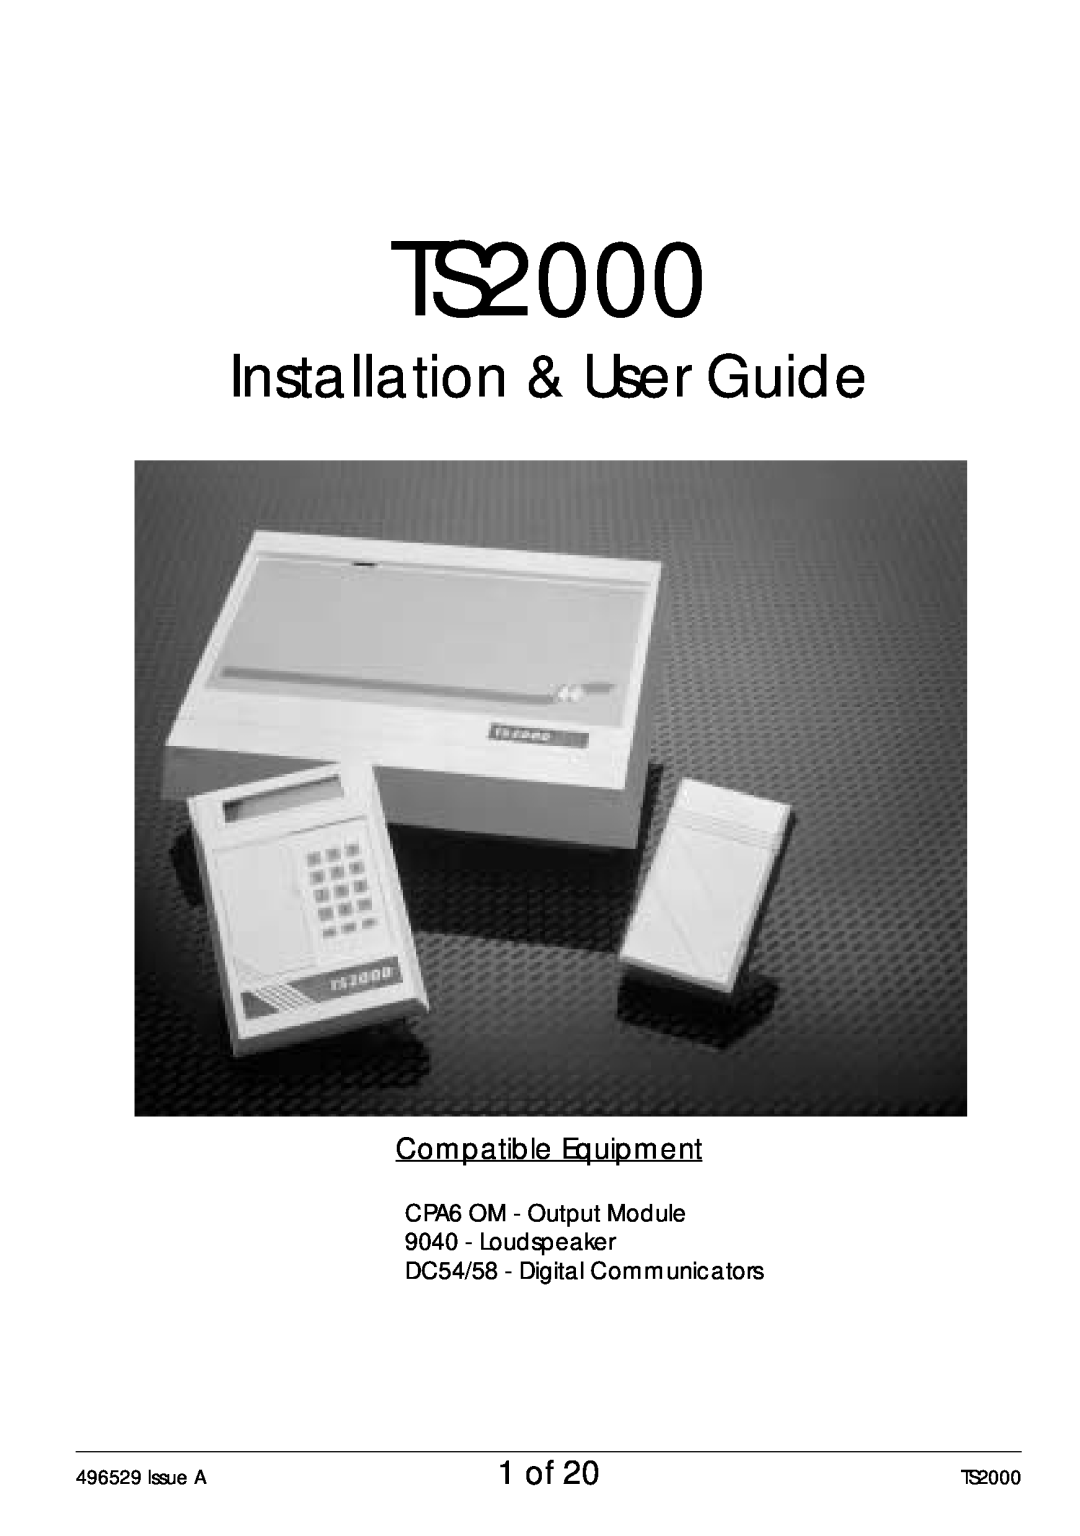 Security Centres TS2000 manual 1 of, Compatible Equipment, CPA6 OM - Output Module 9040 - Loudspeaker 